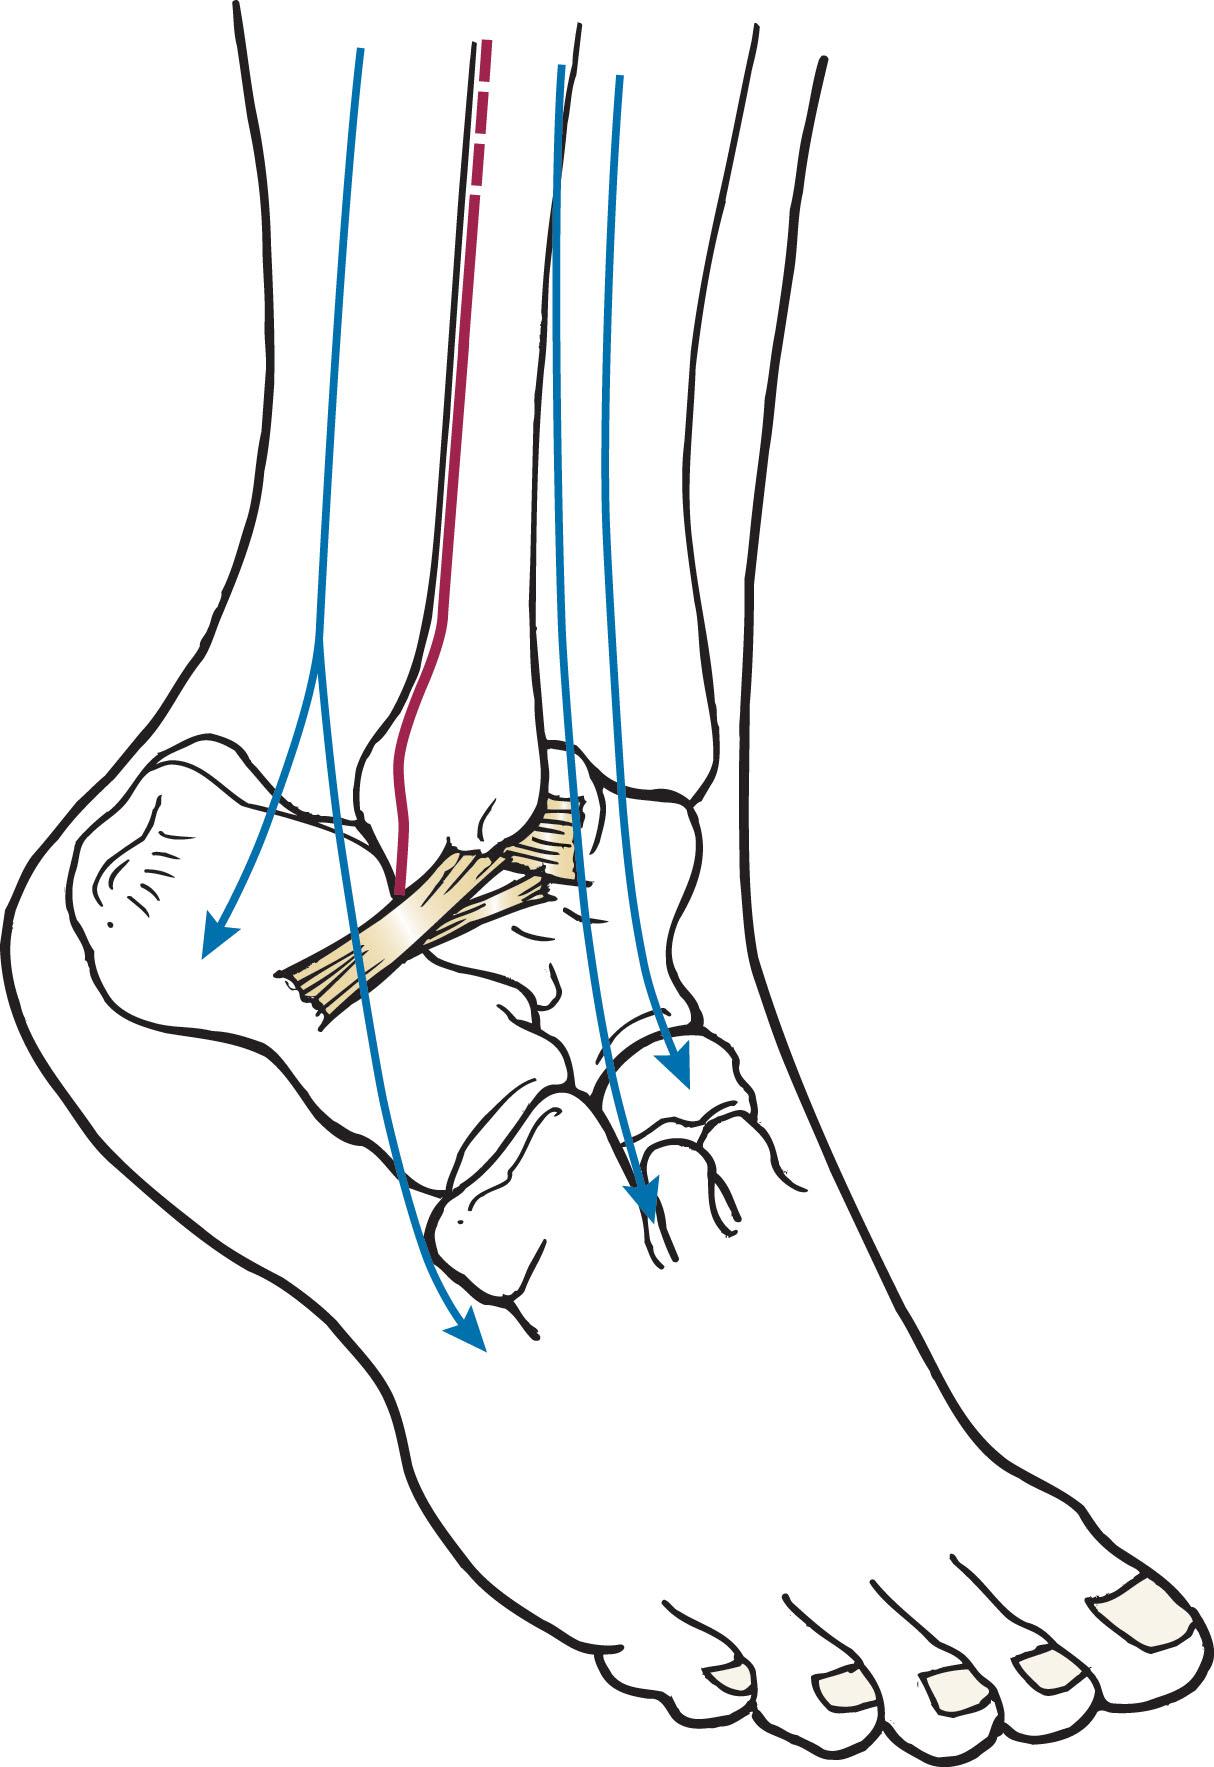 Fig. 44-16, Lateral view. Incision is placed slightly posterior to the fibula, taking care not to damage the superficial peroneal nerve or the sural nerve.